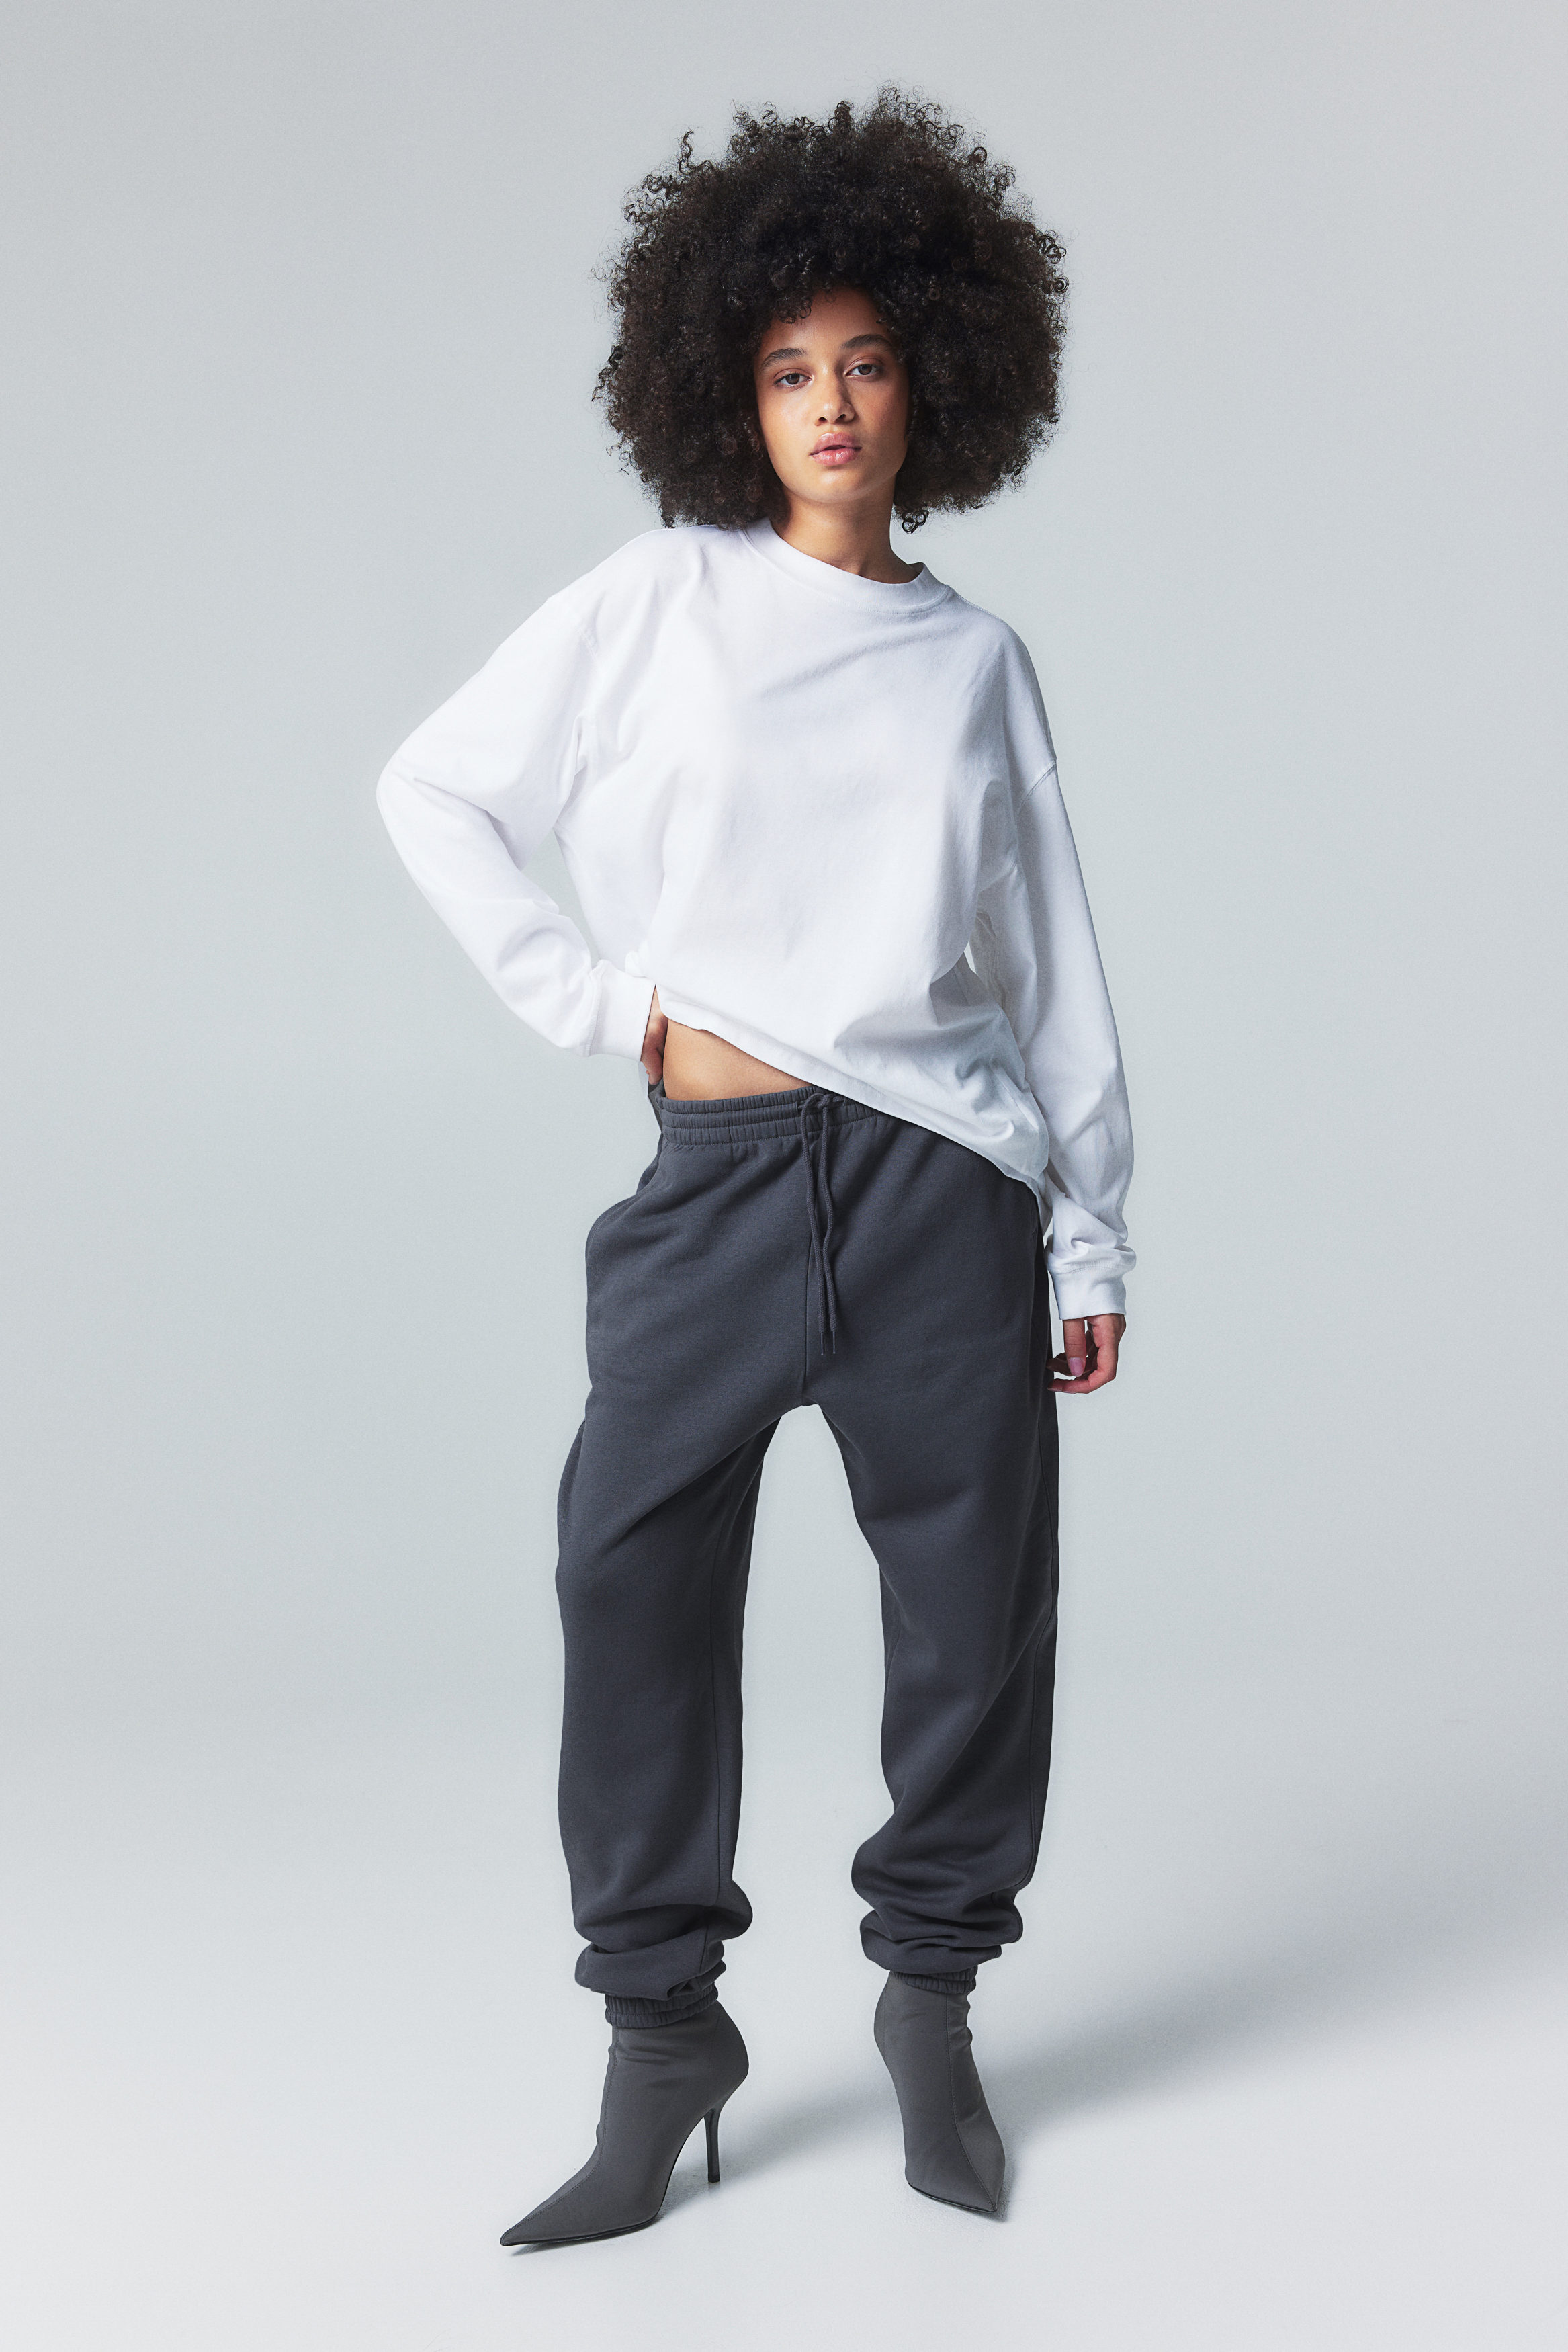 Buy High-waisted joggers online